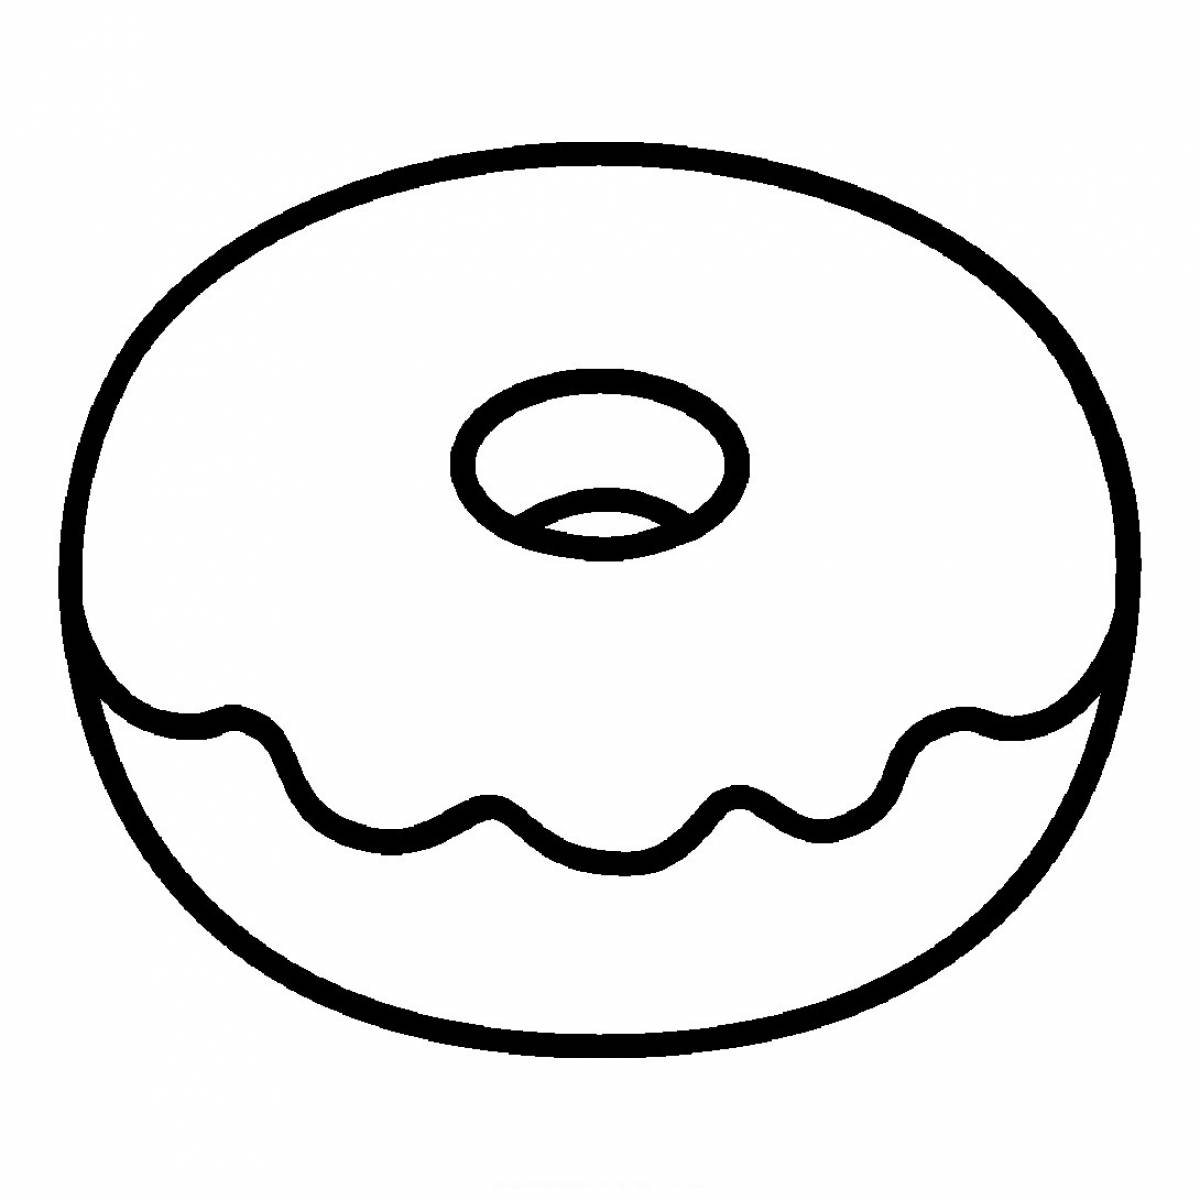 Donut coloring page